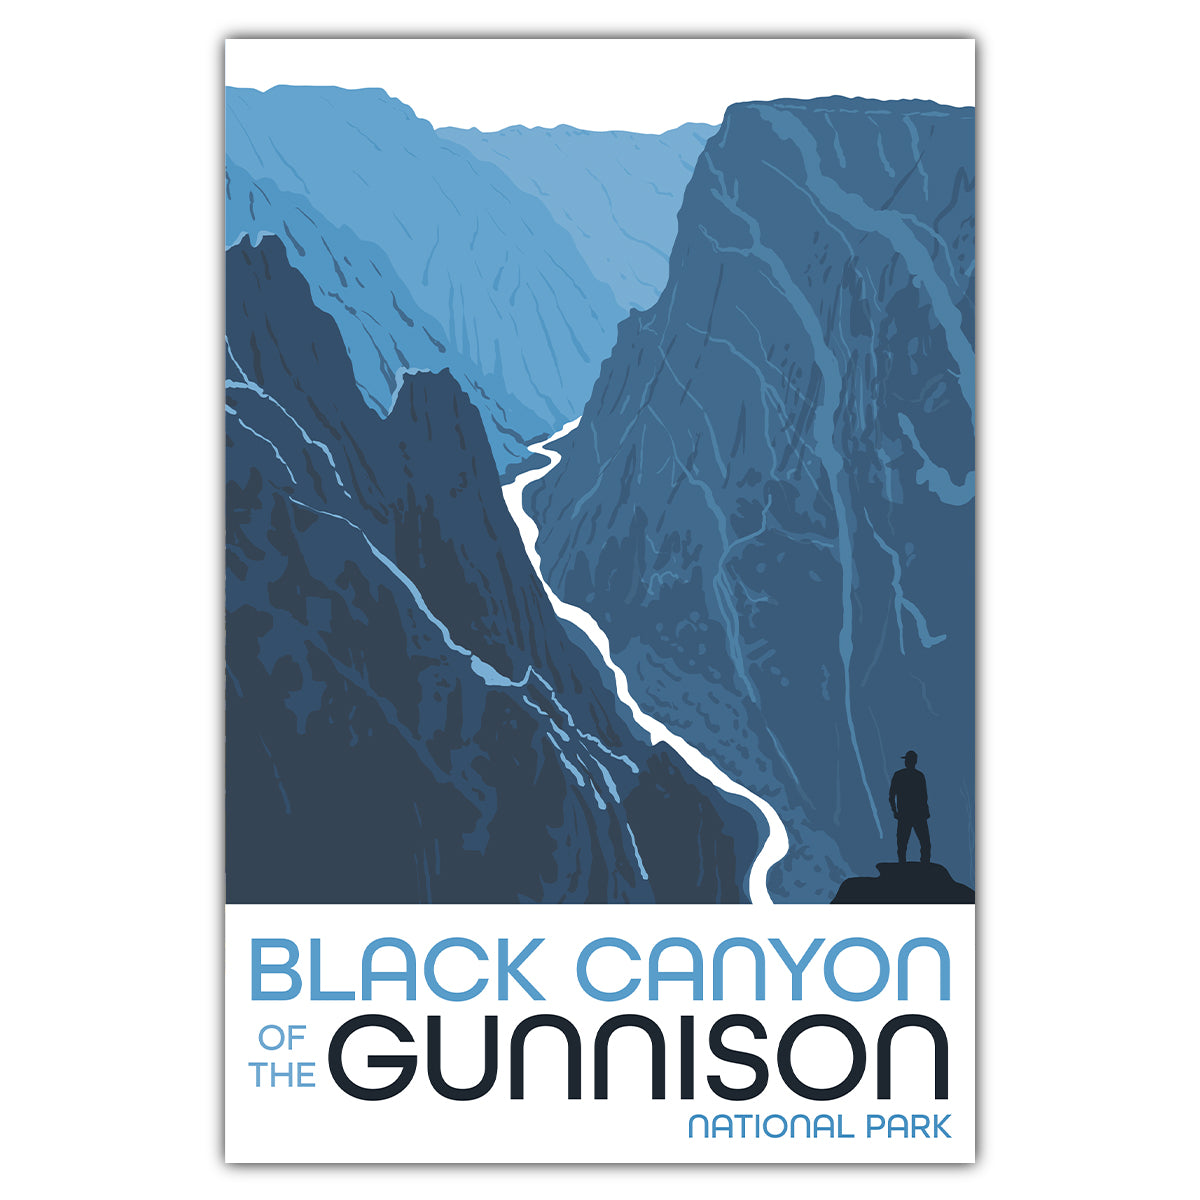 Black Canyon of the Gunnison National Park Painted Wall Postcard - Bozz Prints